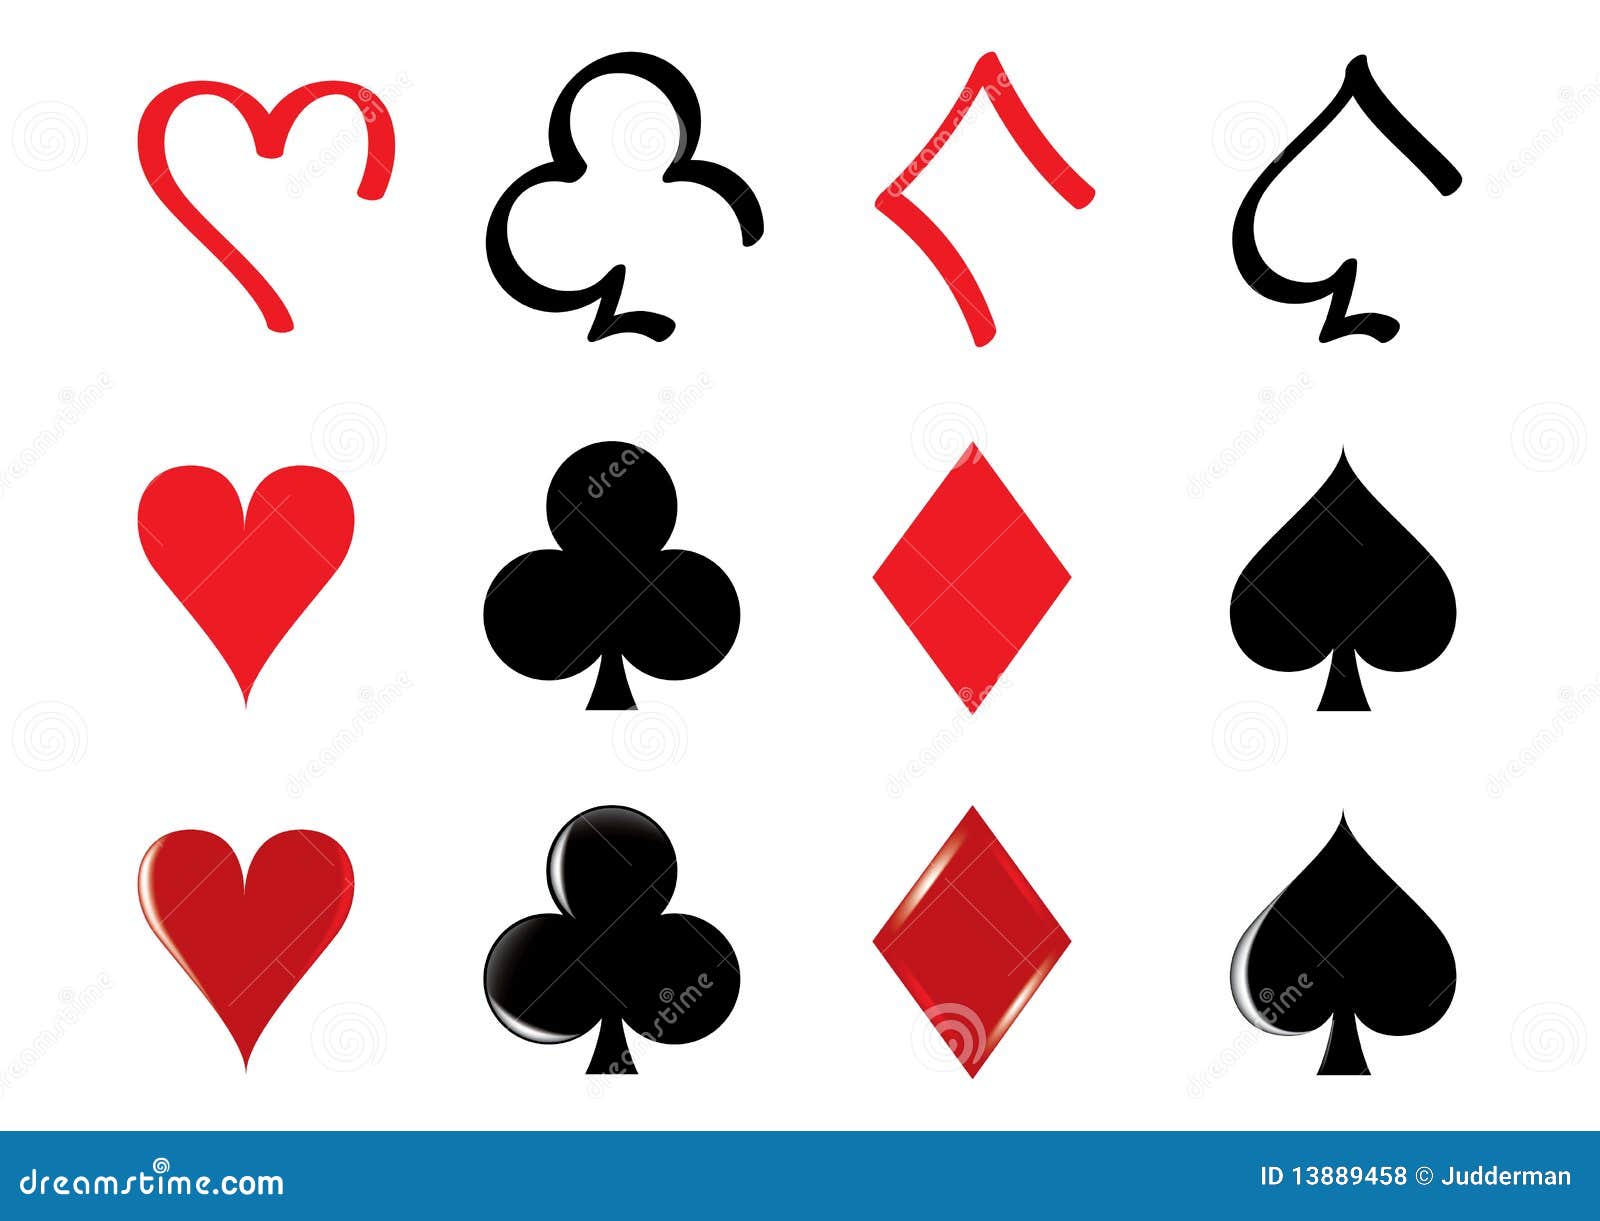 playing card icons